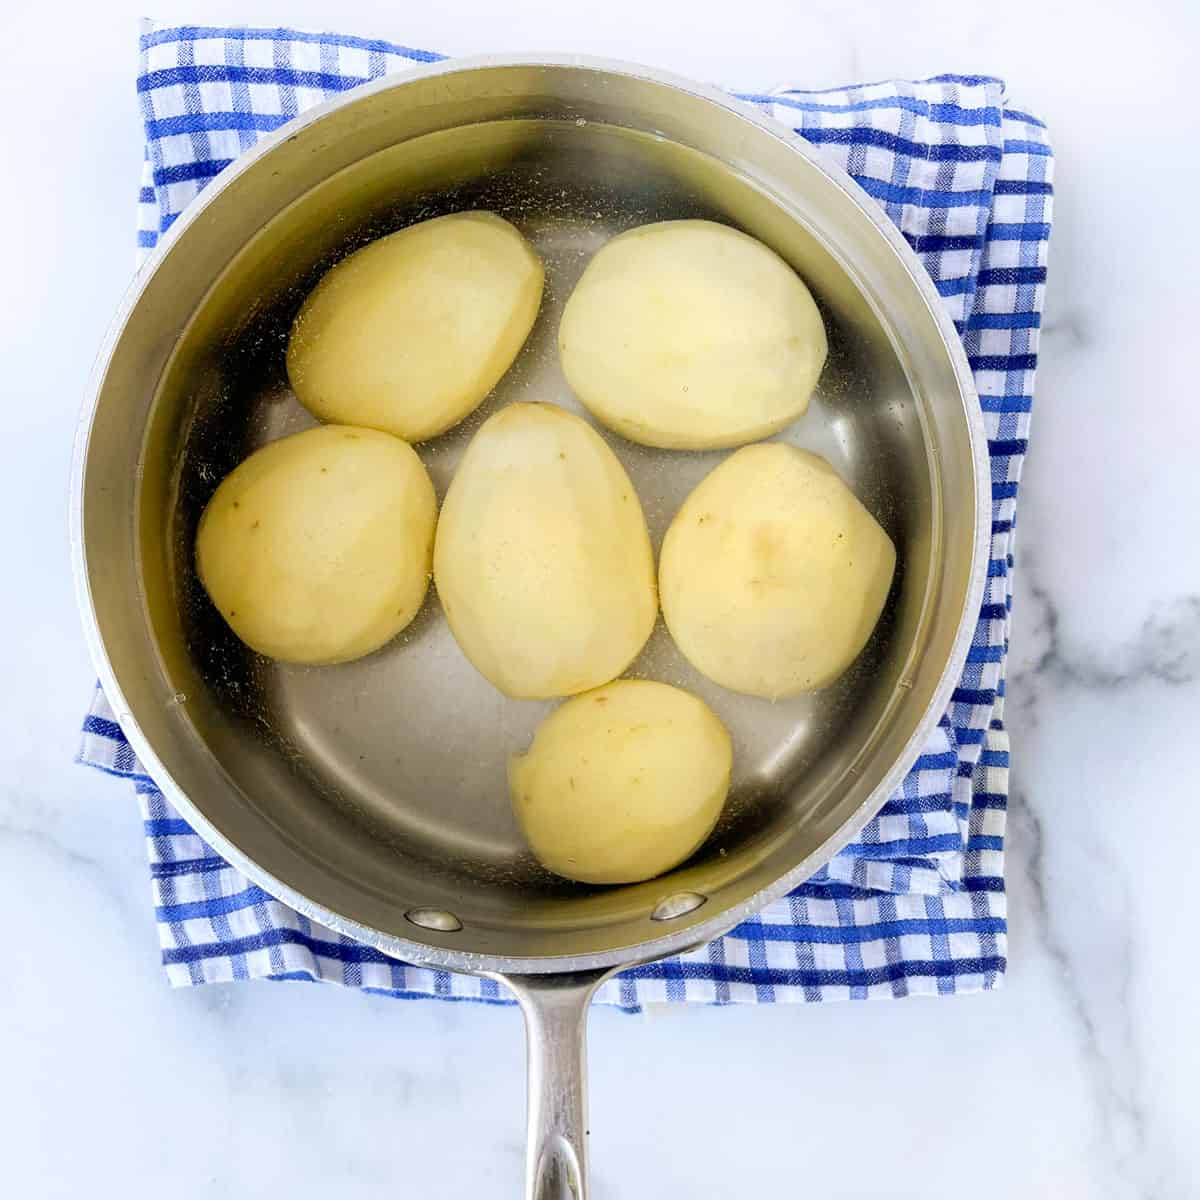 6 peeled Yukon gold potatoes in a saucepan covered with water.